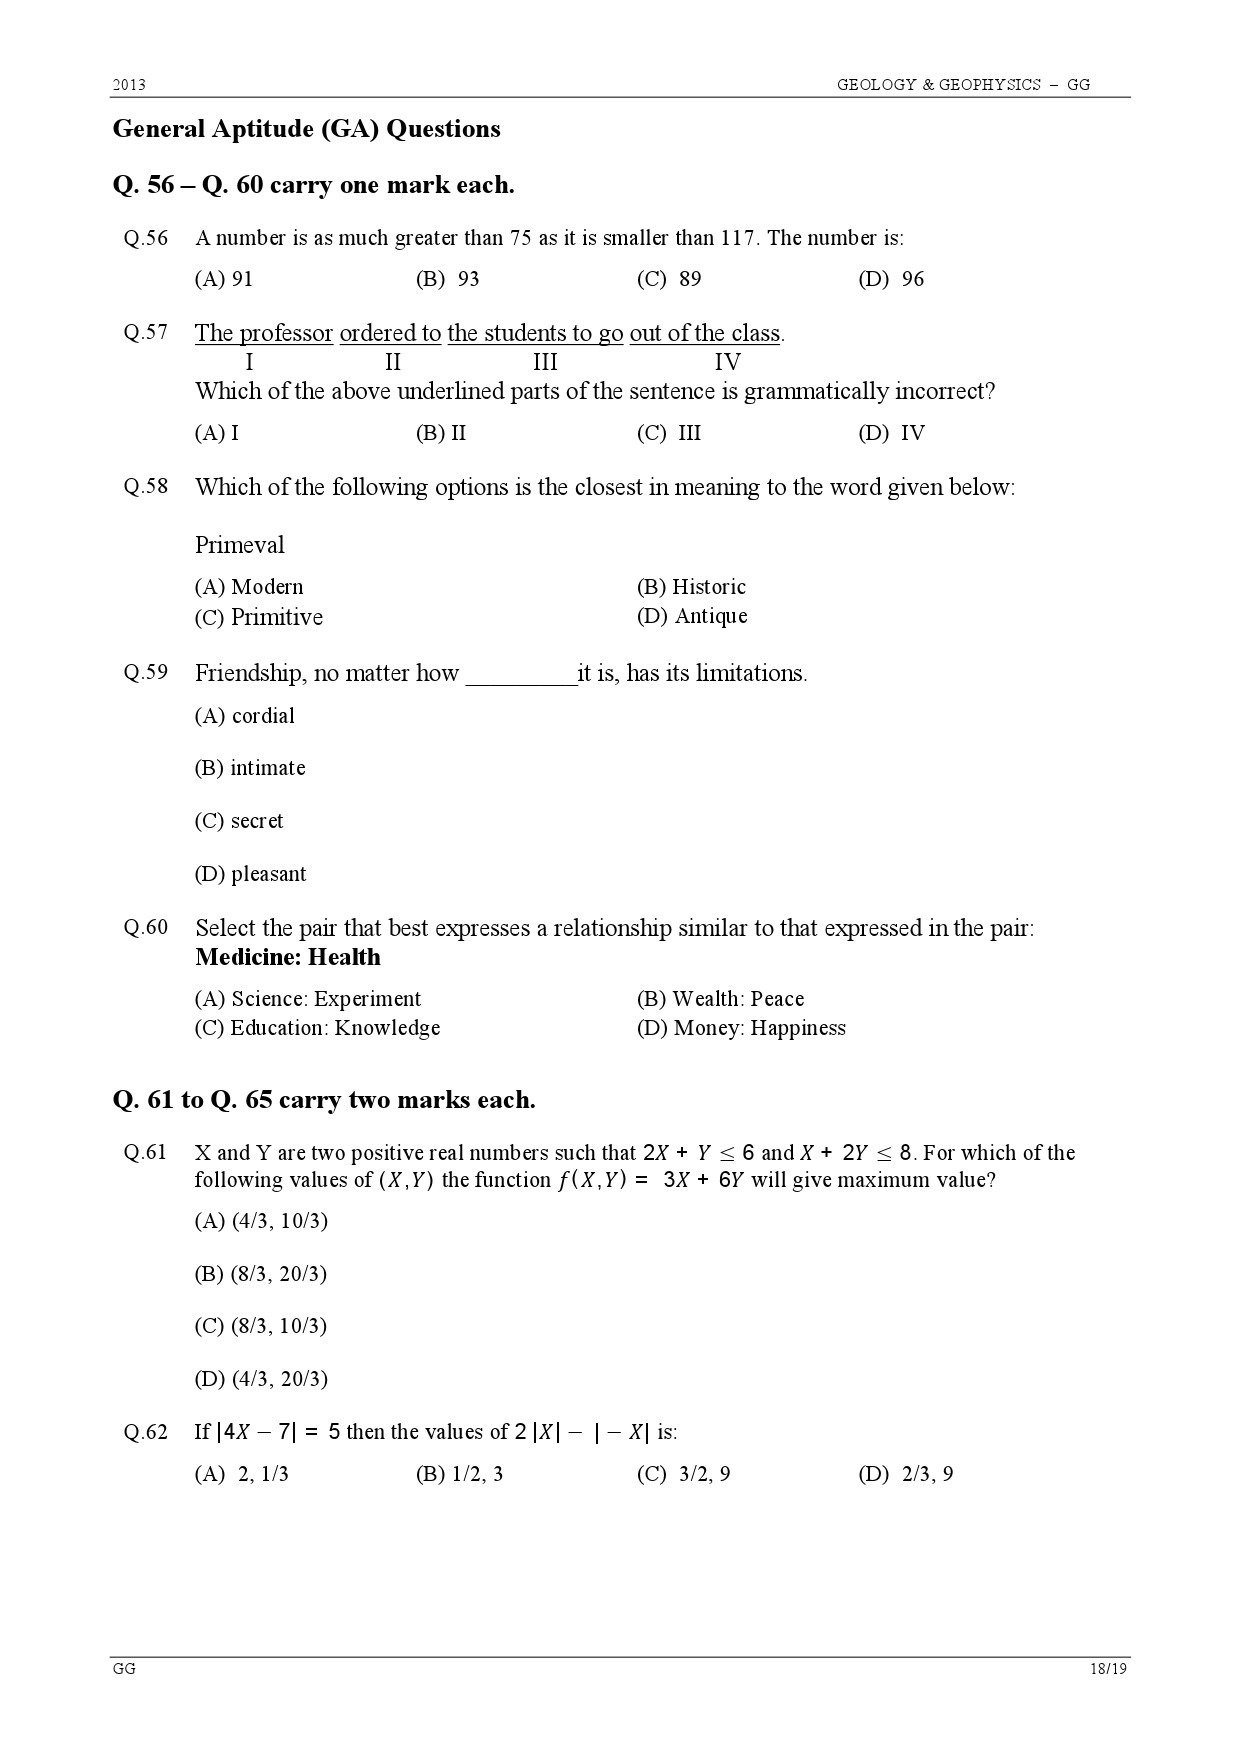 GATE Exam Question Paper 2013 Geology and Geophysics 18